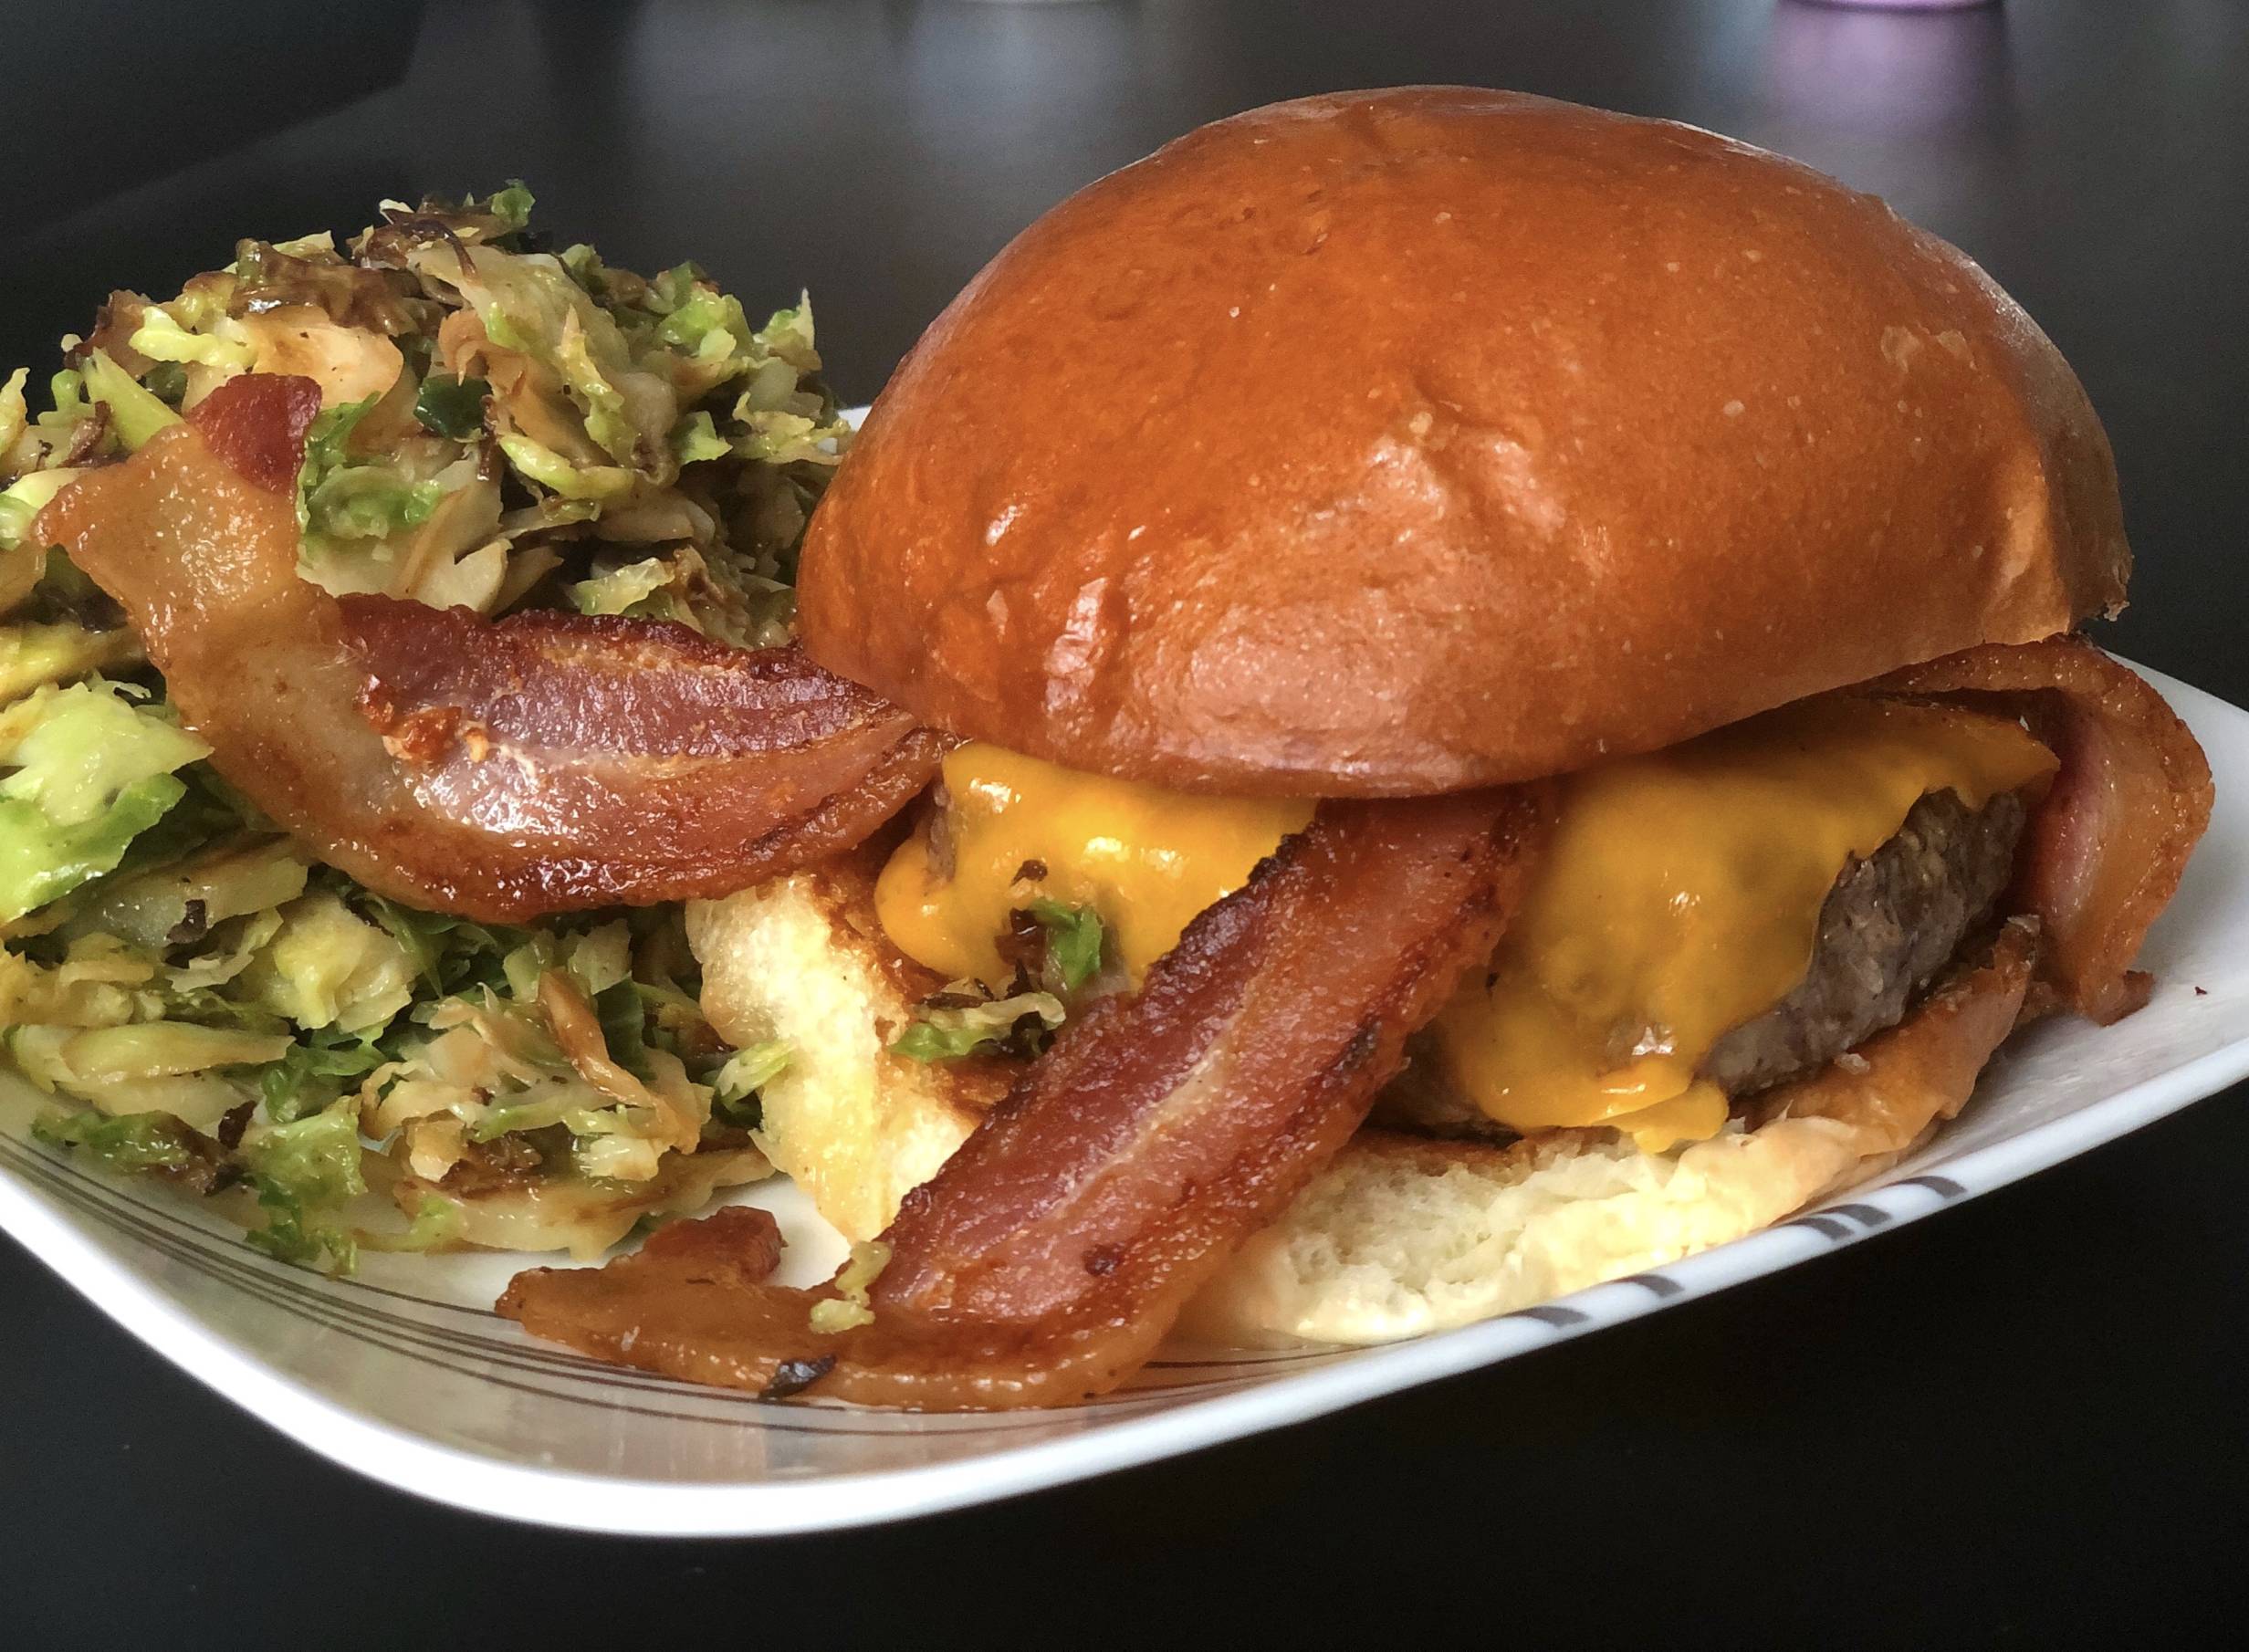 On a white plate, there is a giant cheeseburger with two slices of bacon sticking out several inches next to a pile of shaved Brussels sprouts. Photo by Alyssa Buckley.